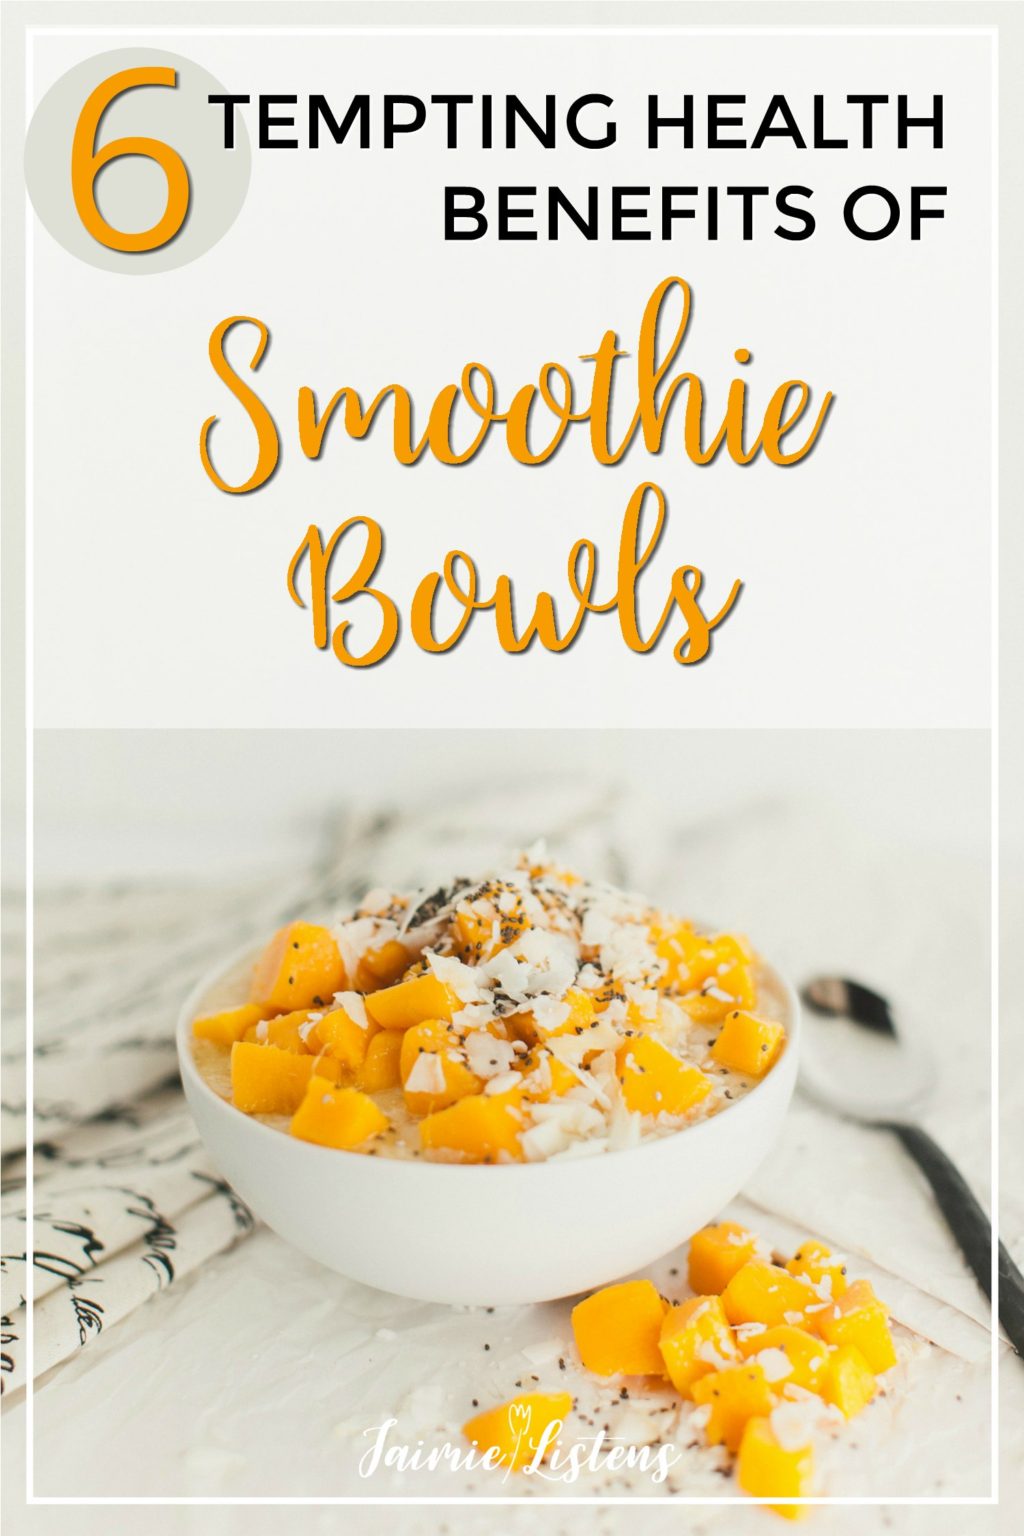 6 Tempting Health Benefits of Smoothie Bowls - Jaimie Listens: Delicious, easy to make smoothie bowls make the perfect breakfast to increase energy and help you keep slim!